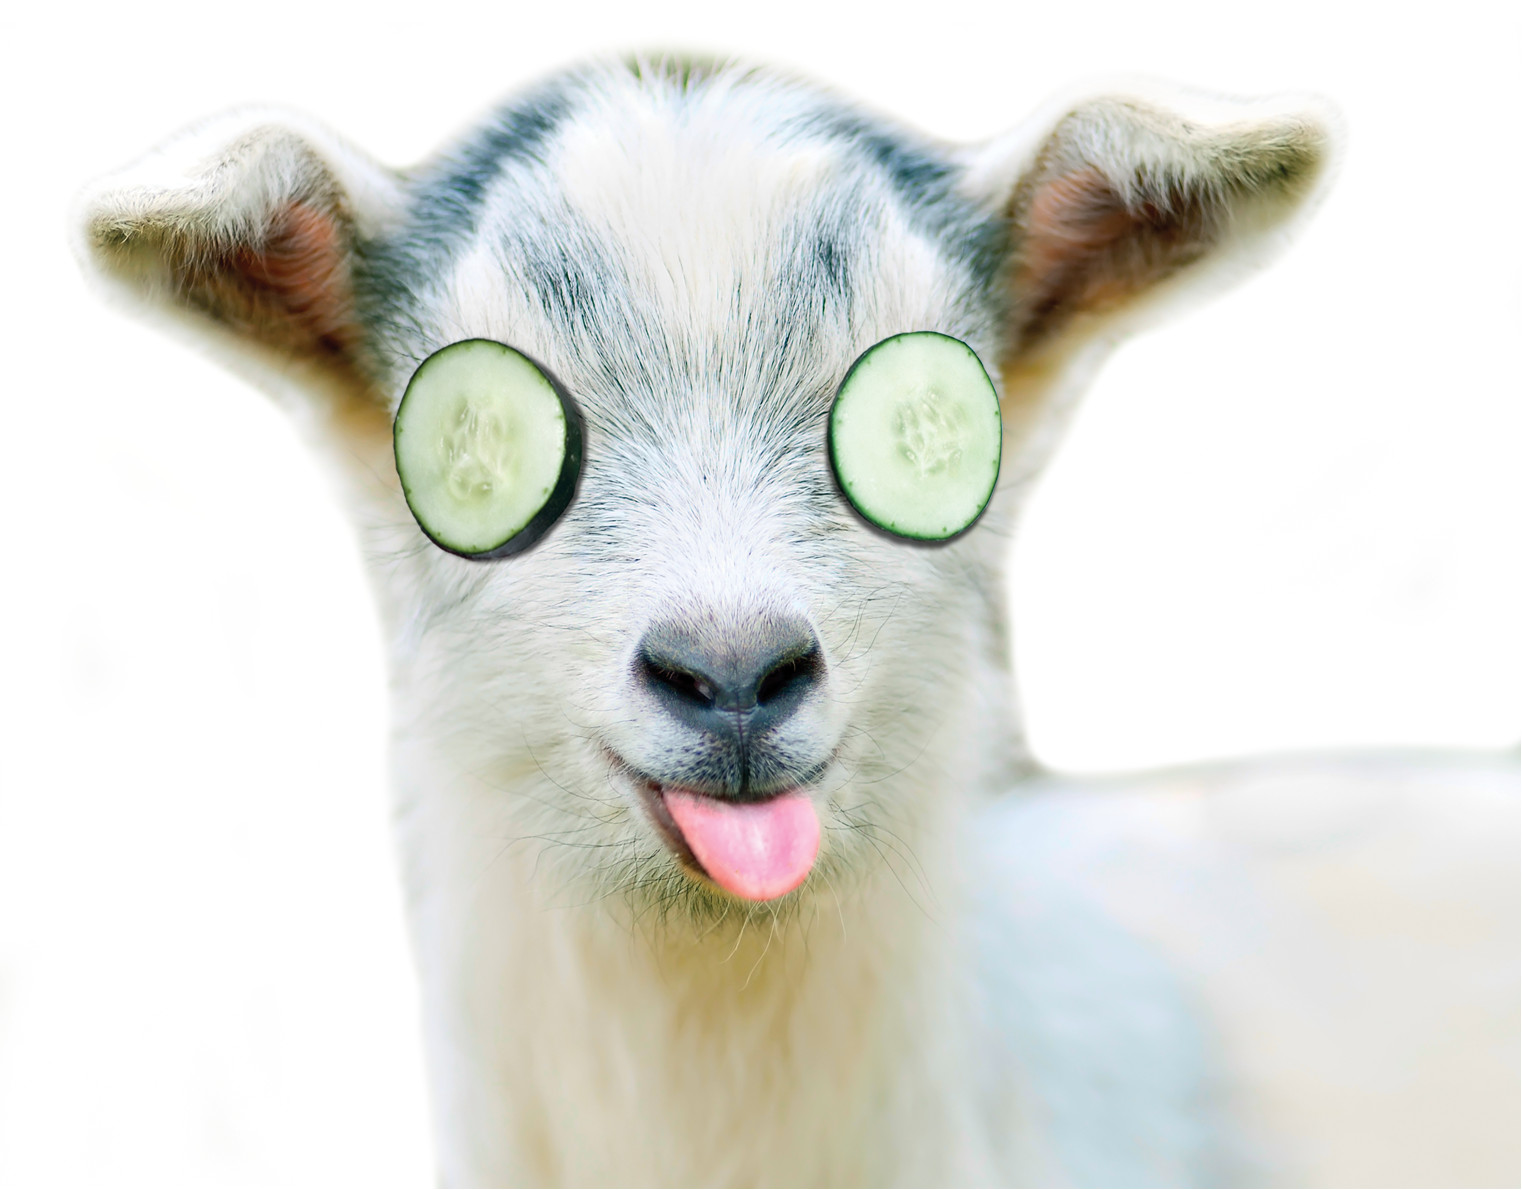 Image of goat with Cucumbers